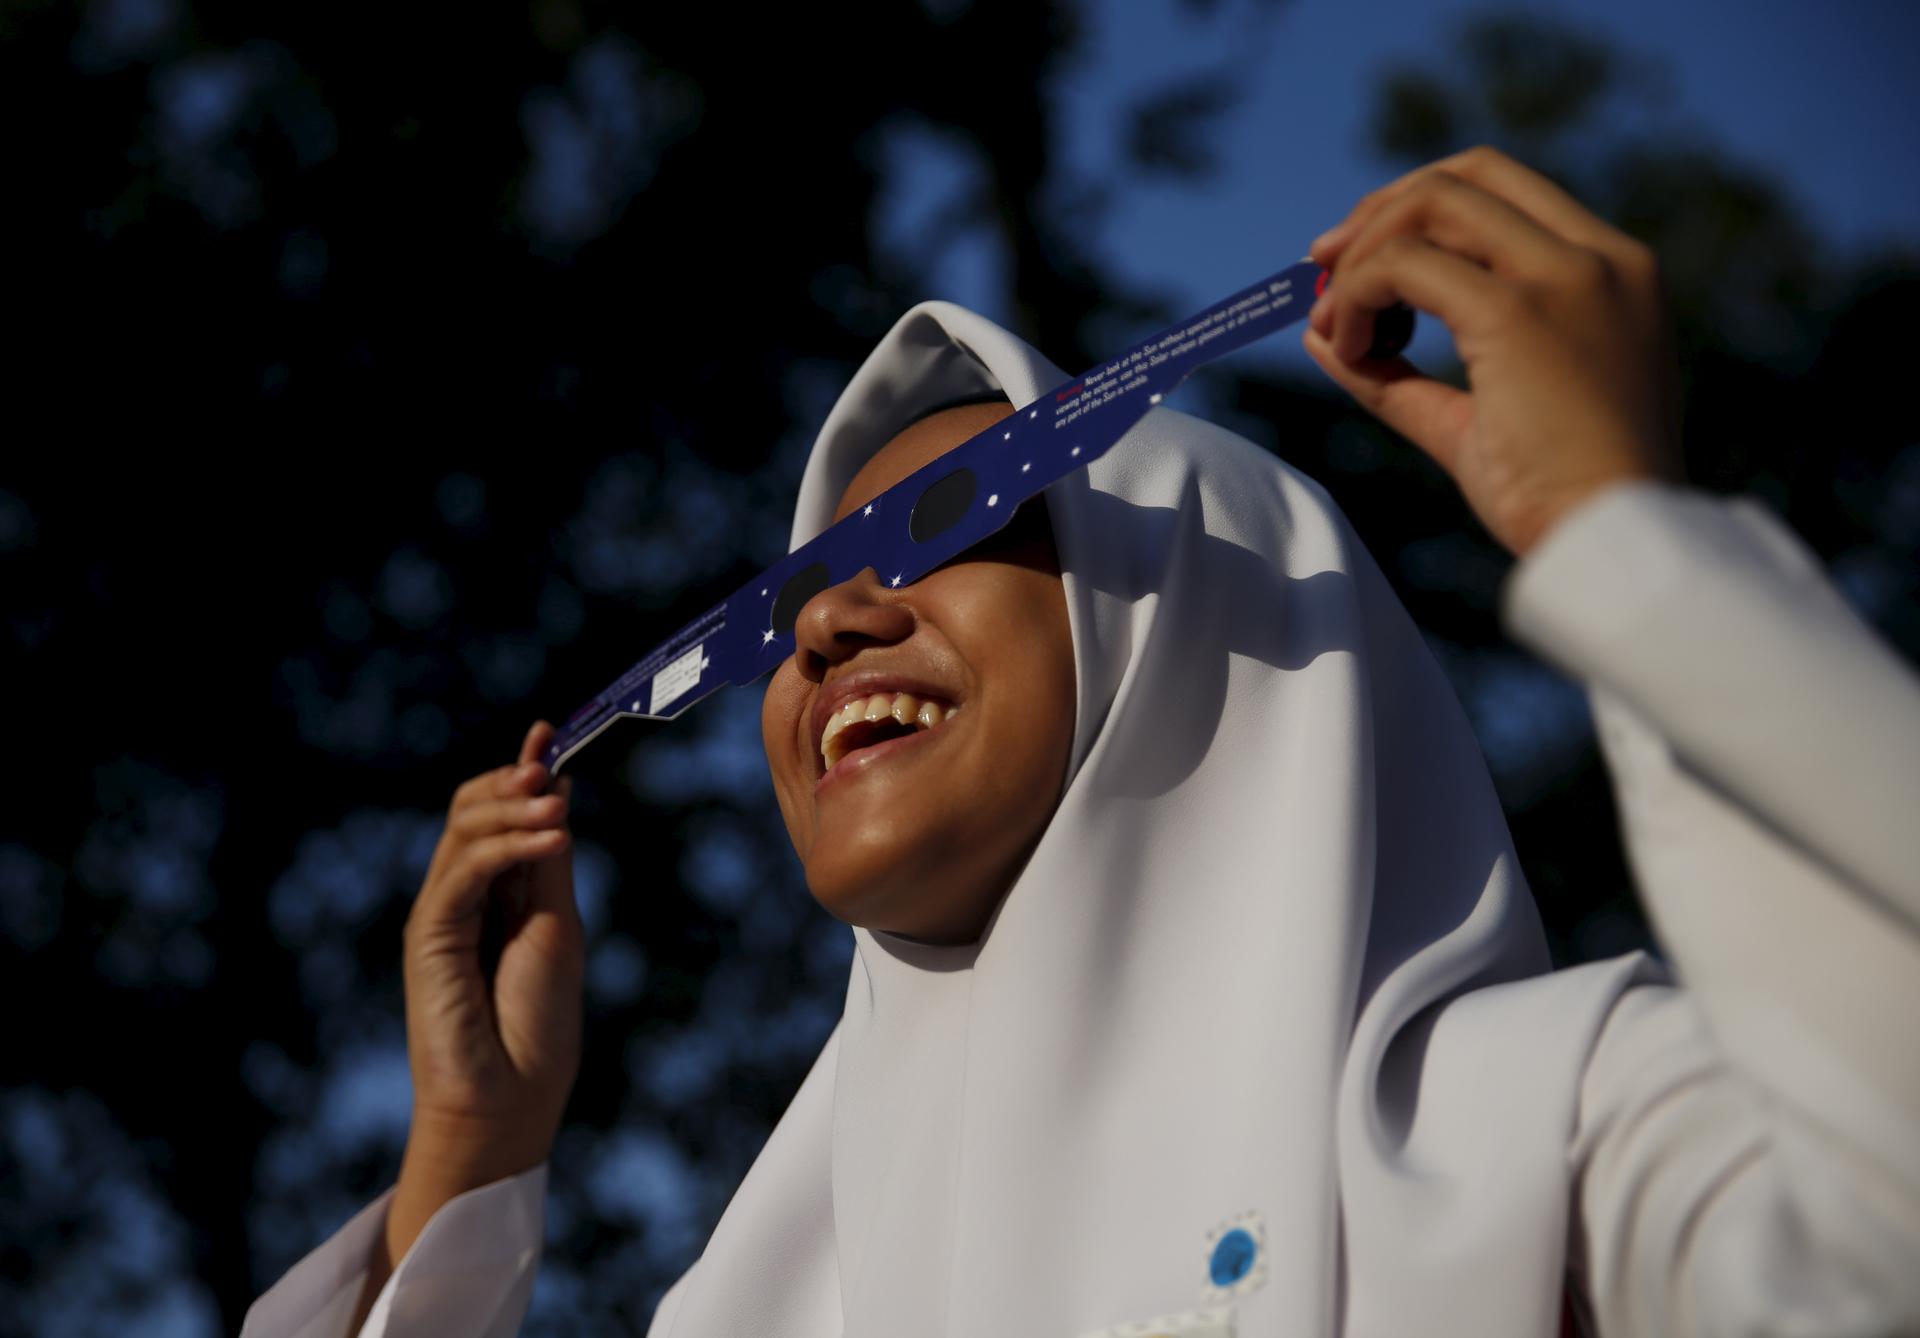 A school girl watches a partial solar eclipse at the Planetarium in Kuala Lumpur, Malaysia, March 9, 2016.